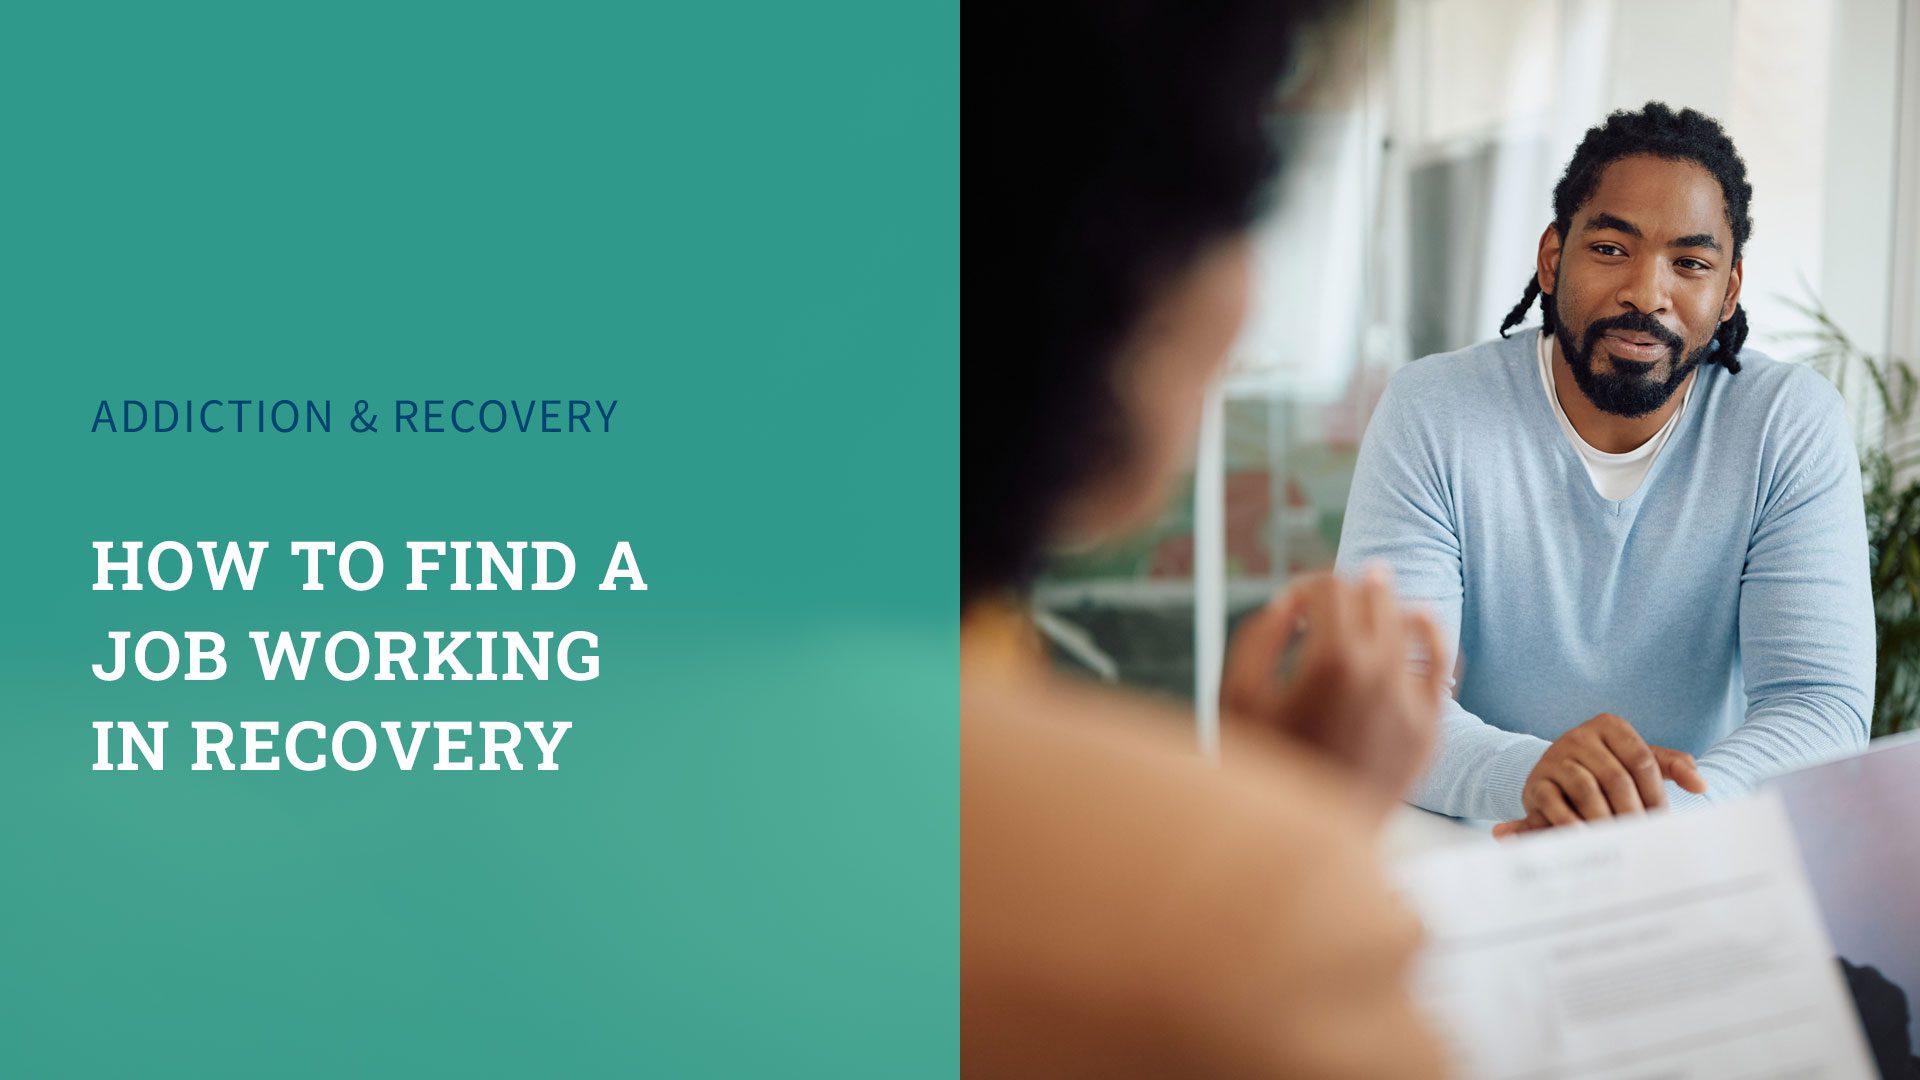 How to Find a Job Working in Recovery